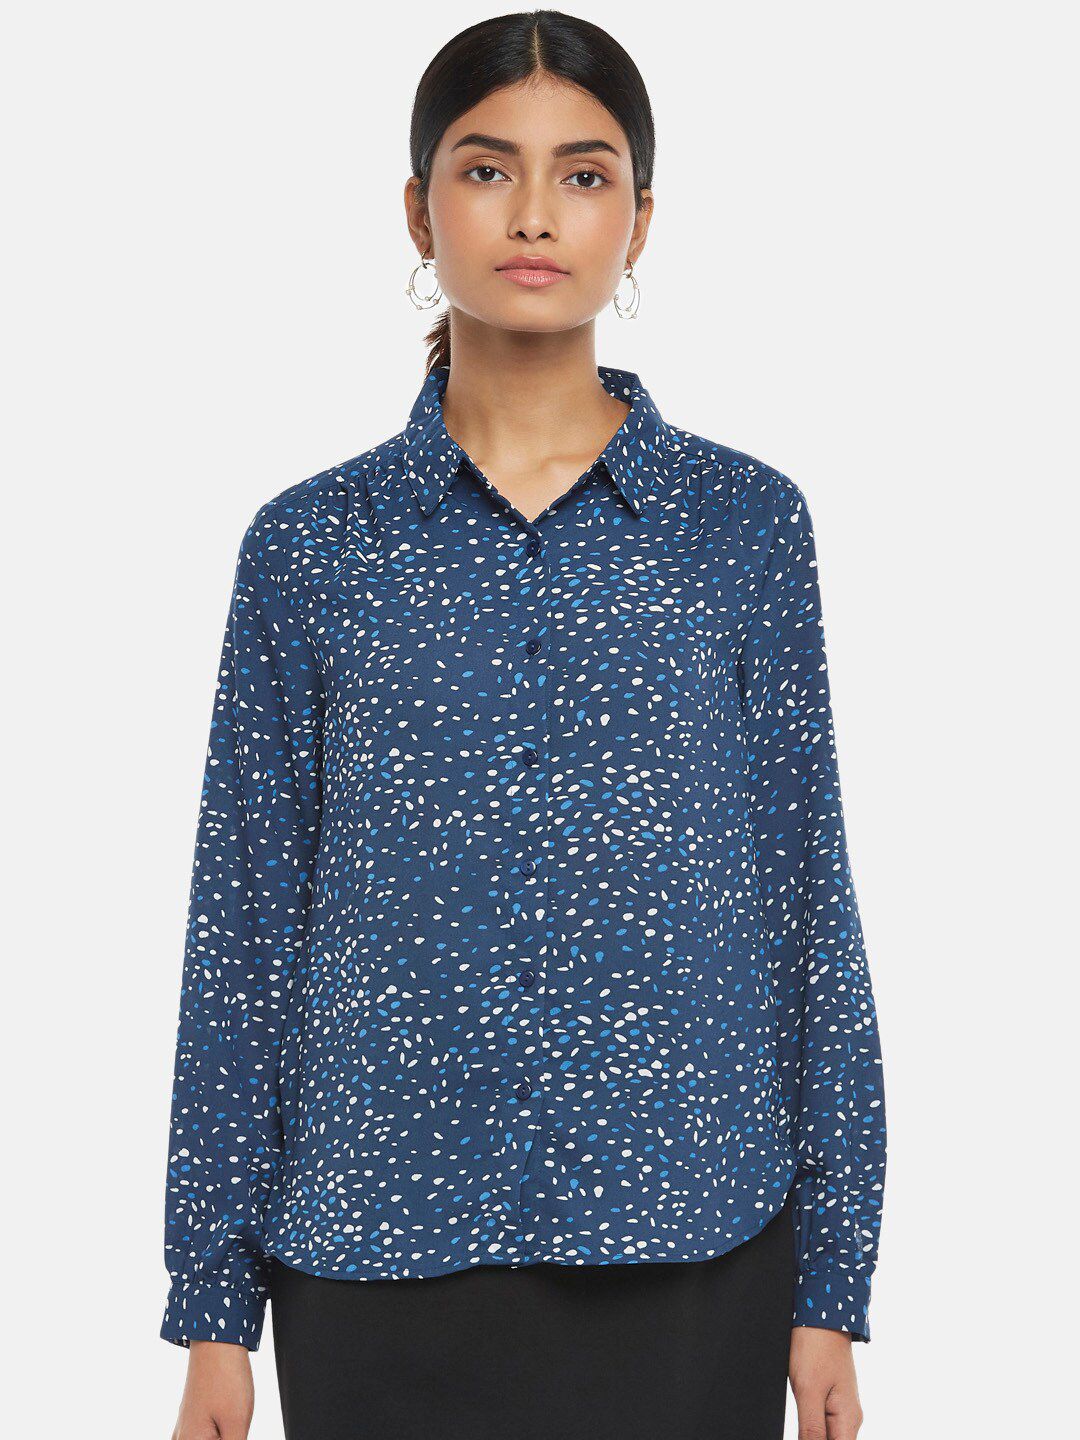 Annabelle by Pantaloons Blue Floral Print Shirt Style Top Price in India